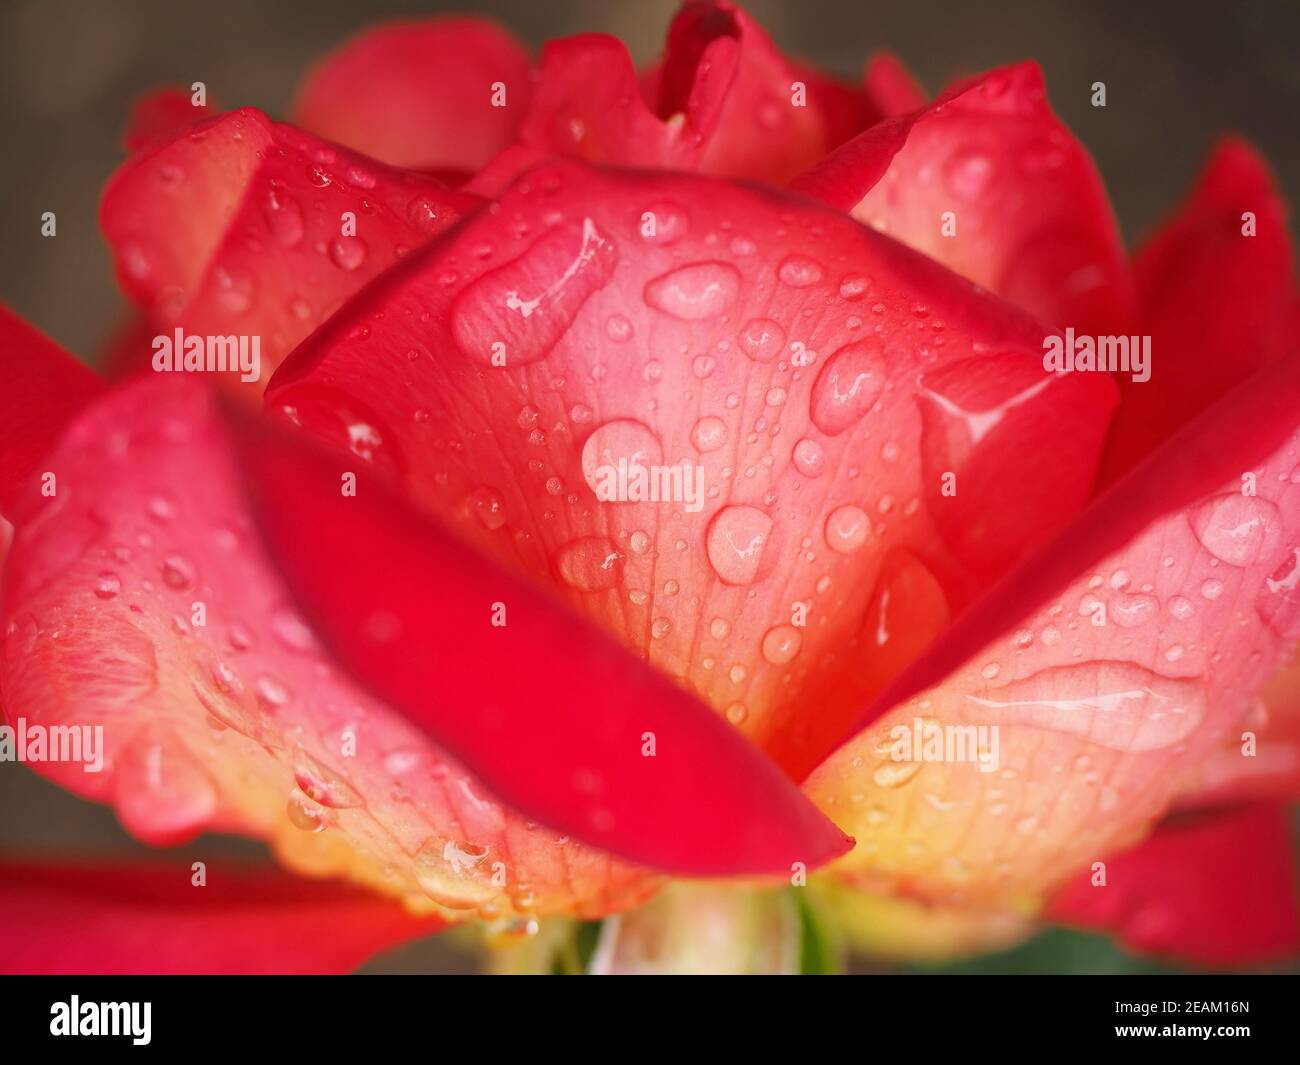 Red rose with drops close up Stock Photo